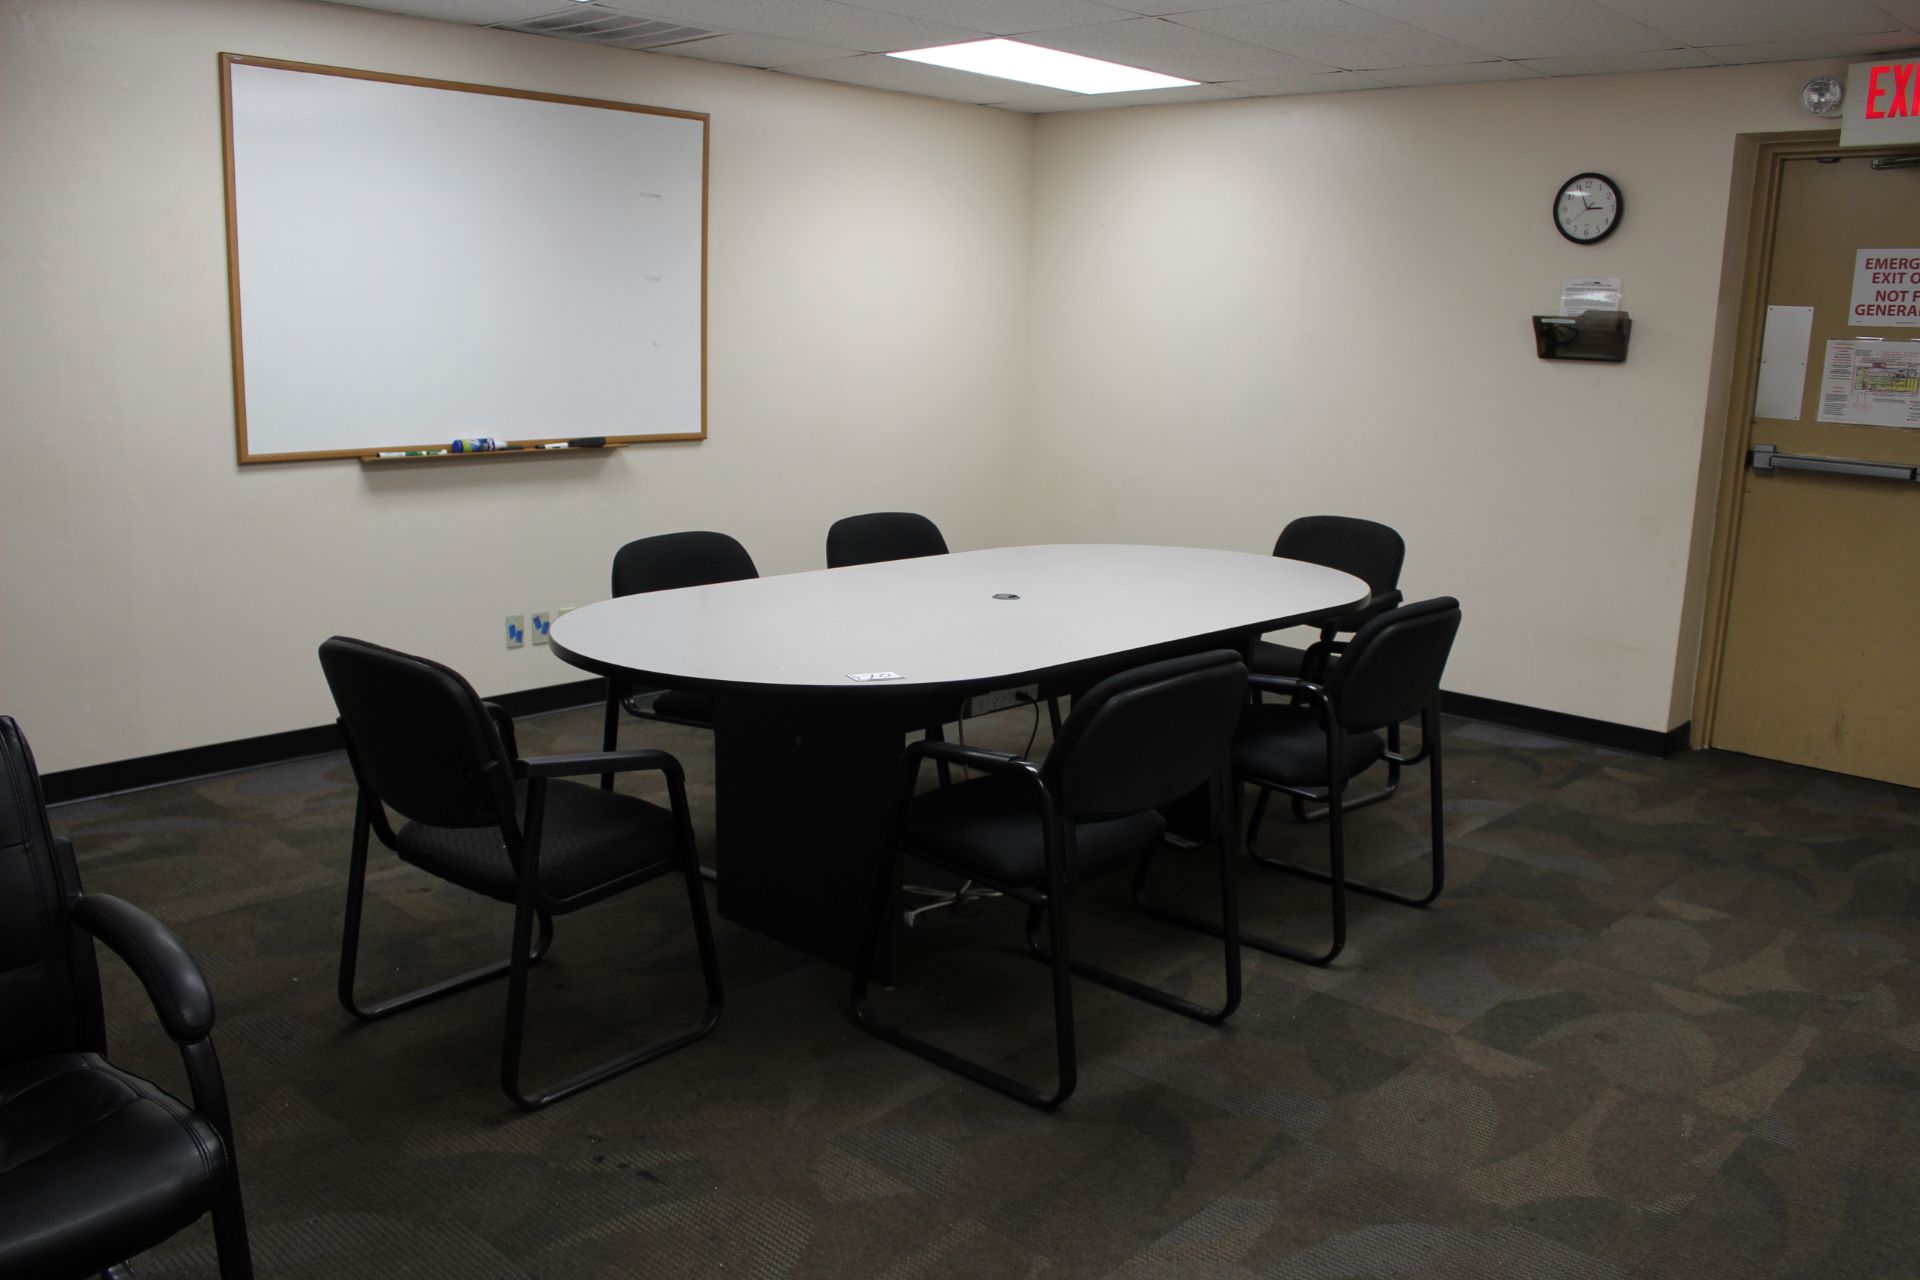 CONFERENCE TABLE, CHAIRS, AND 2 WHITE BOARDS